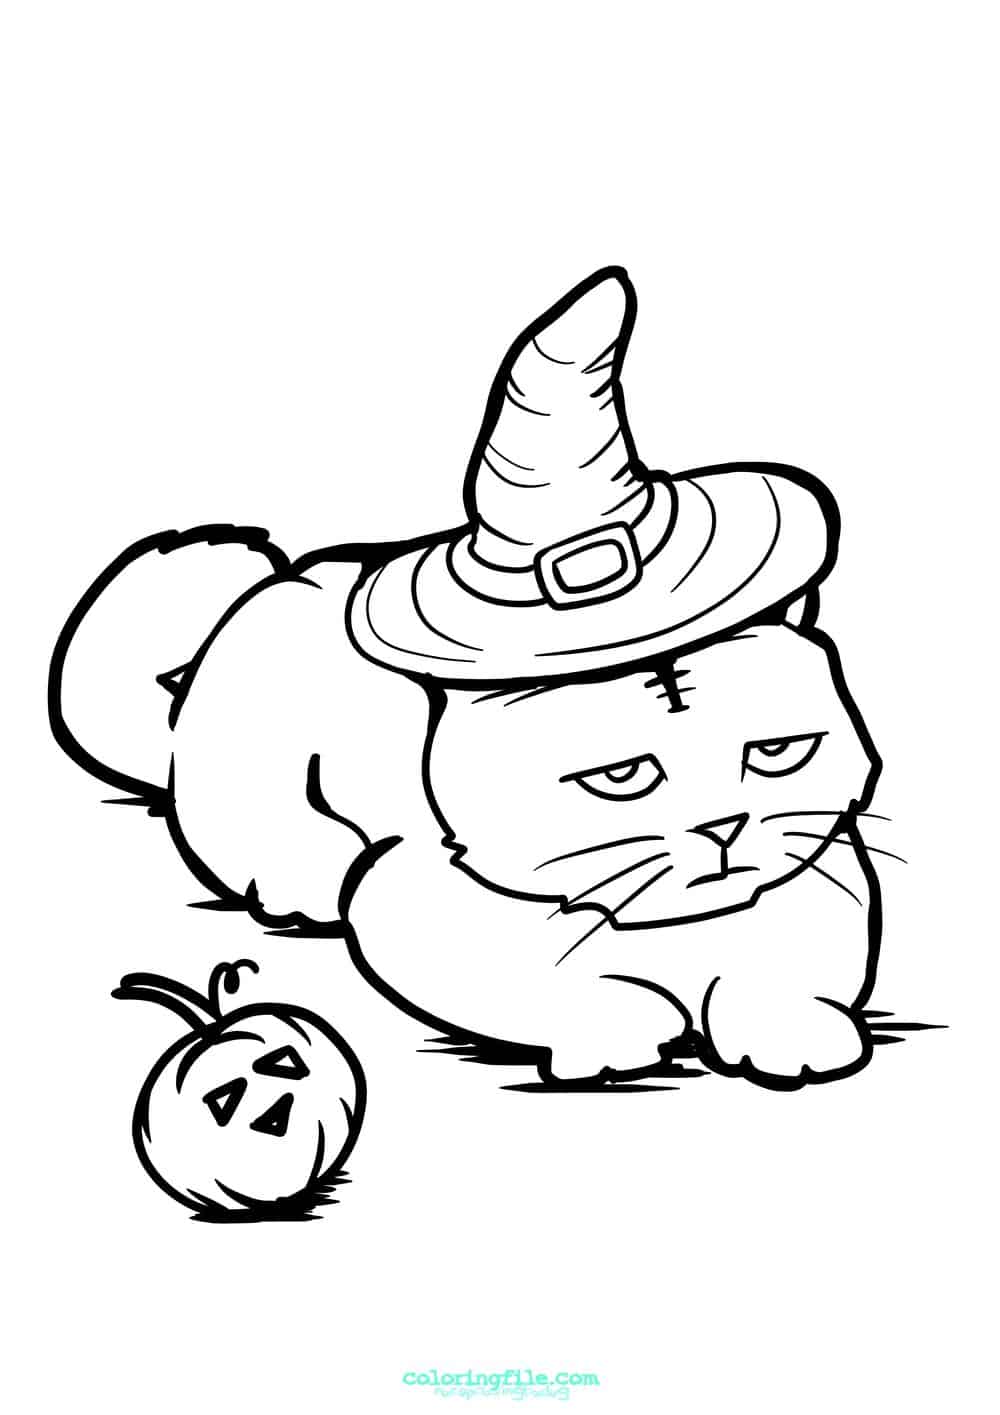 Halloween cat with witch hat coloring pages